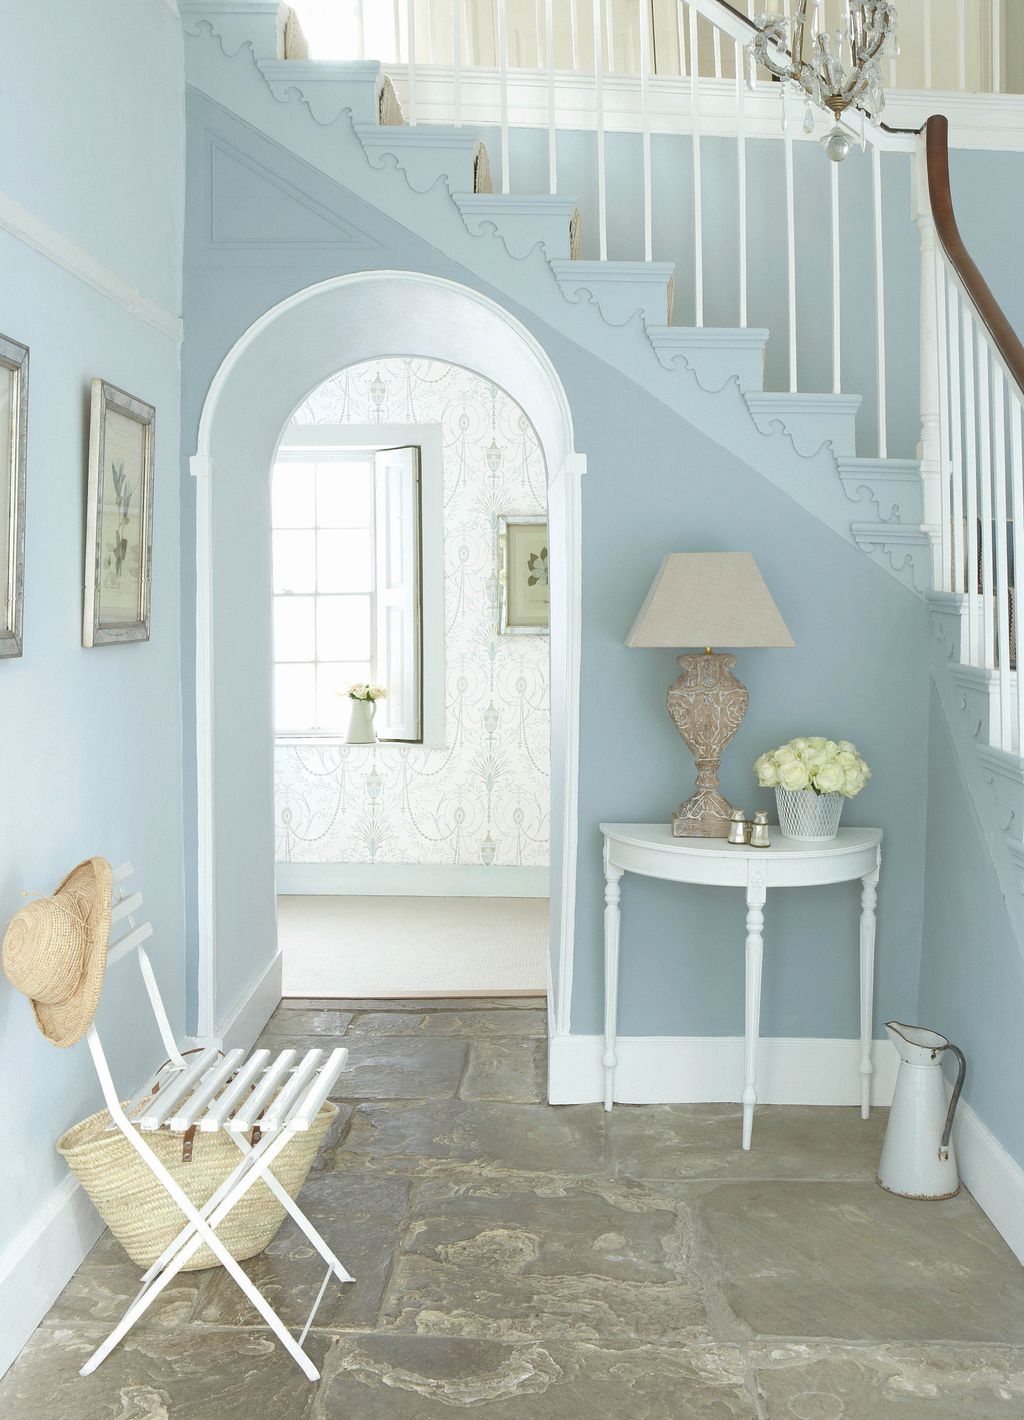 Hallway paint ideas 32 simple ways to add color to your space Real Homes